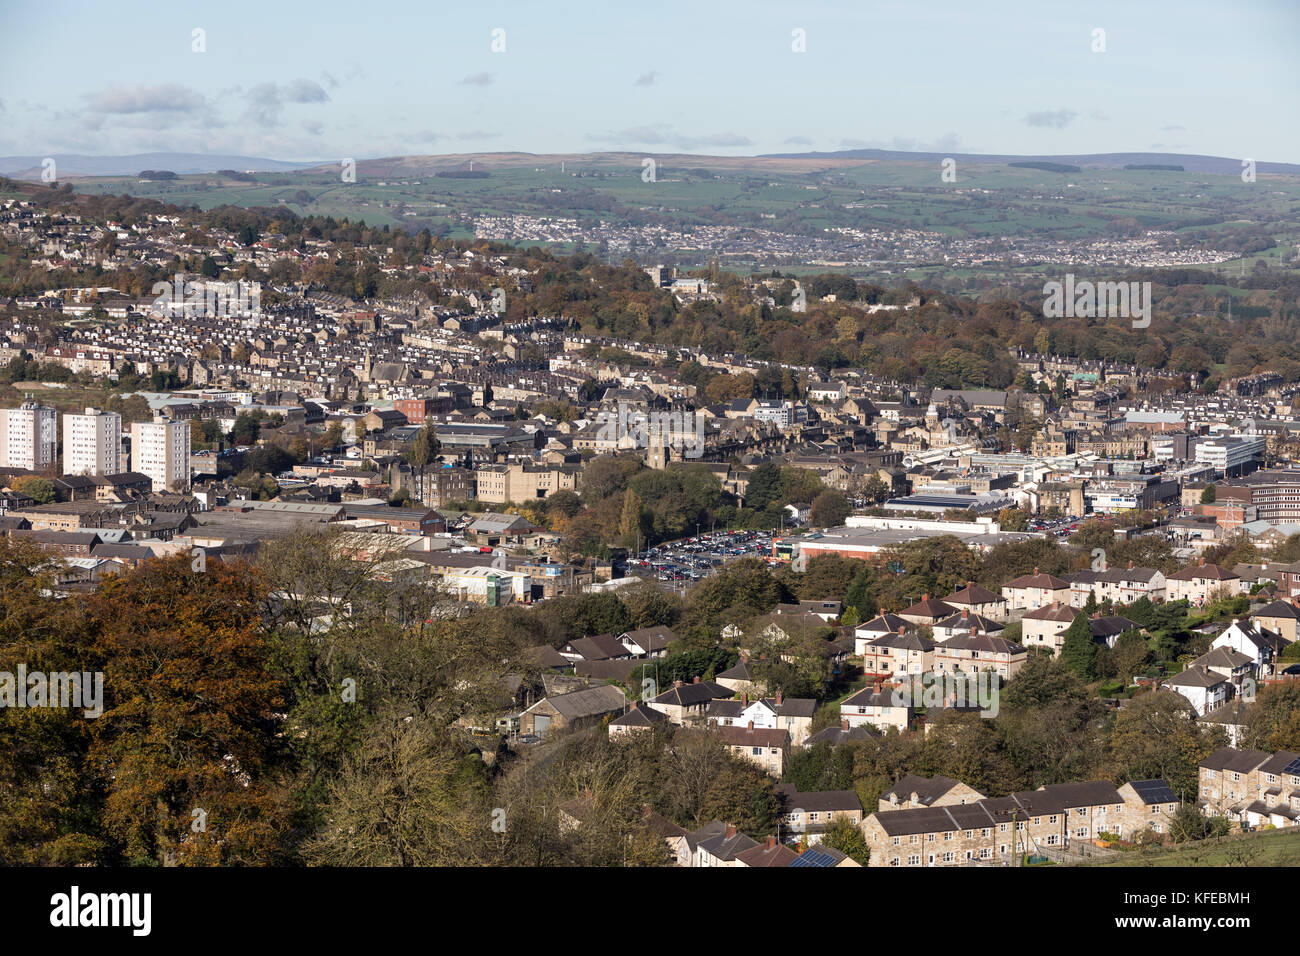 A panorama of Keighley in West Yorkshire, with the three tower blocks of Westgate in the foreground and the Highfield area behind. In the far distance Stock Photo